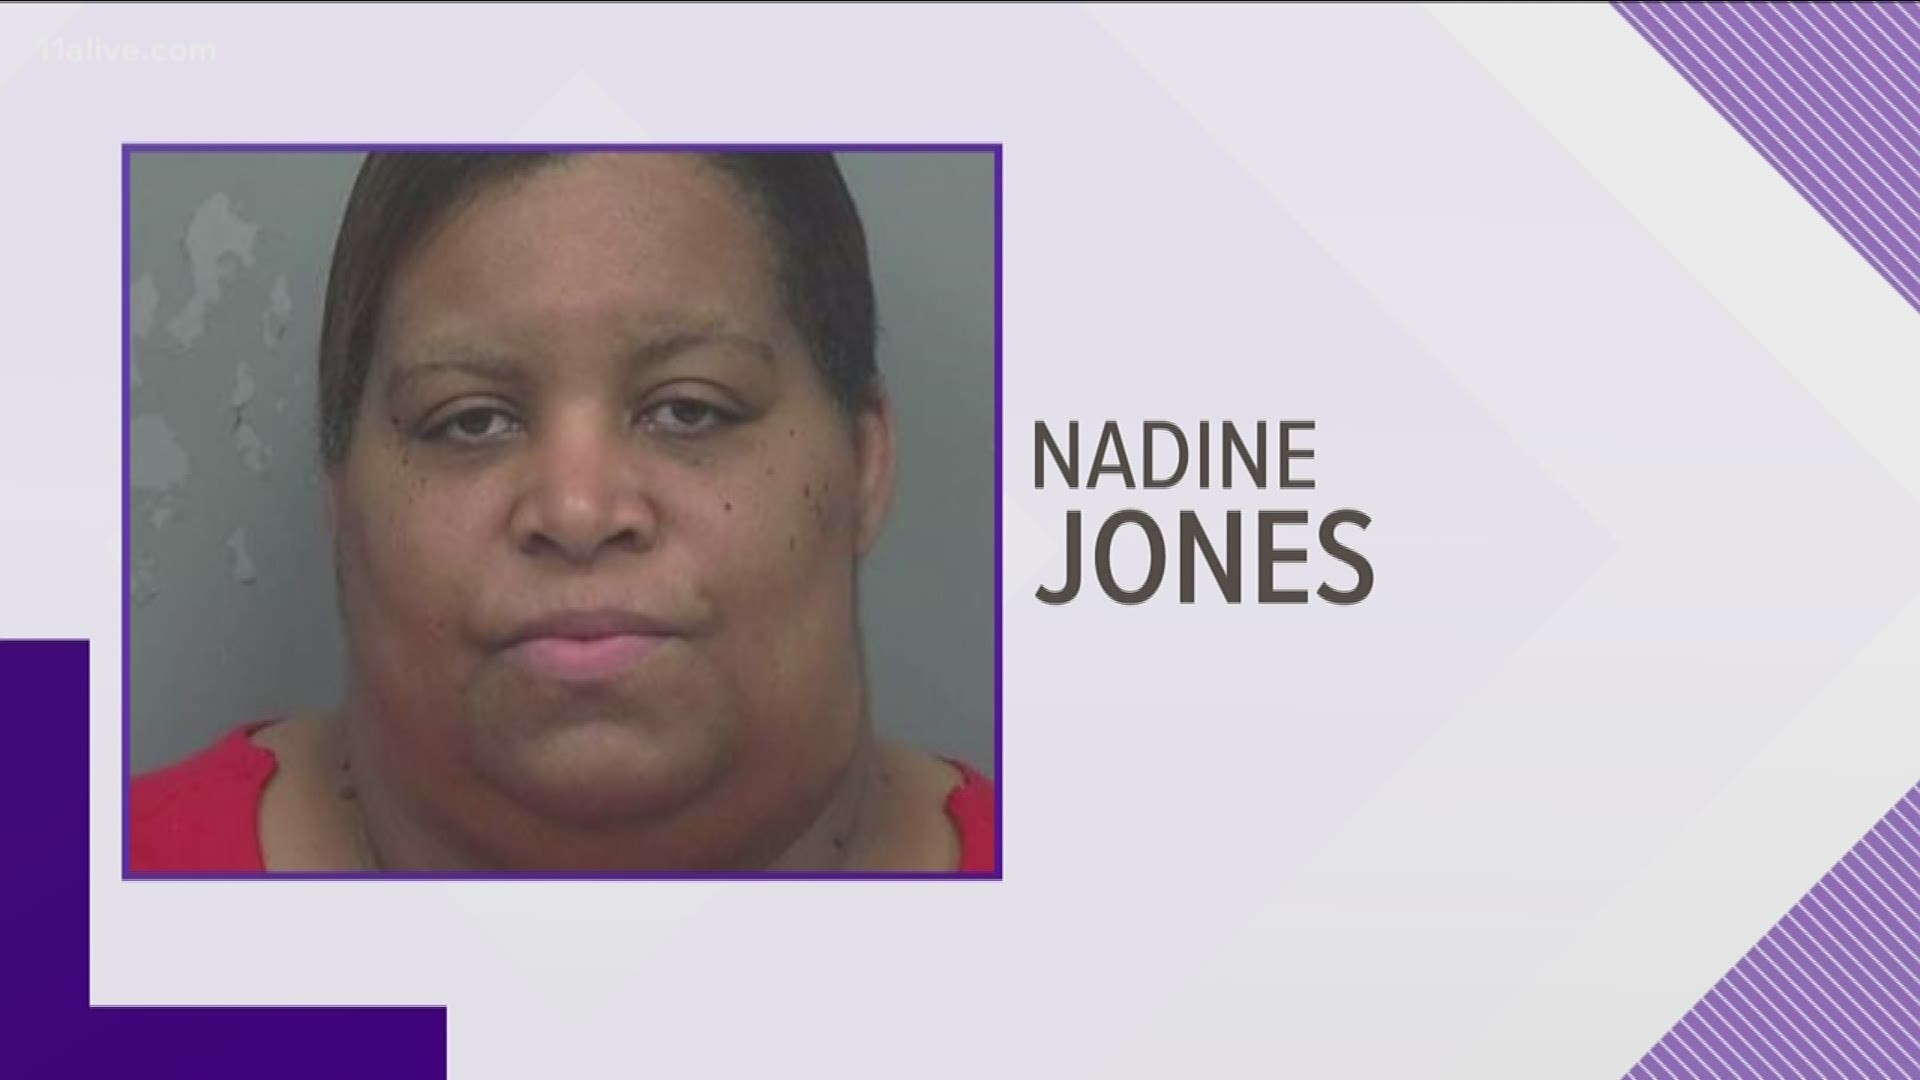 Nadine Jones is accused of child cruelty after parents noticed bruises on their child's body after they came home from daycare.